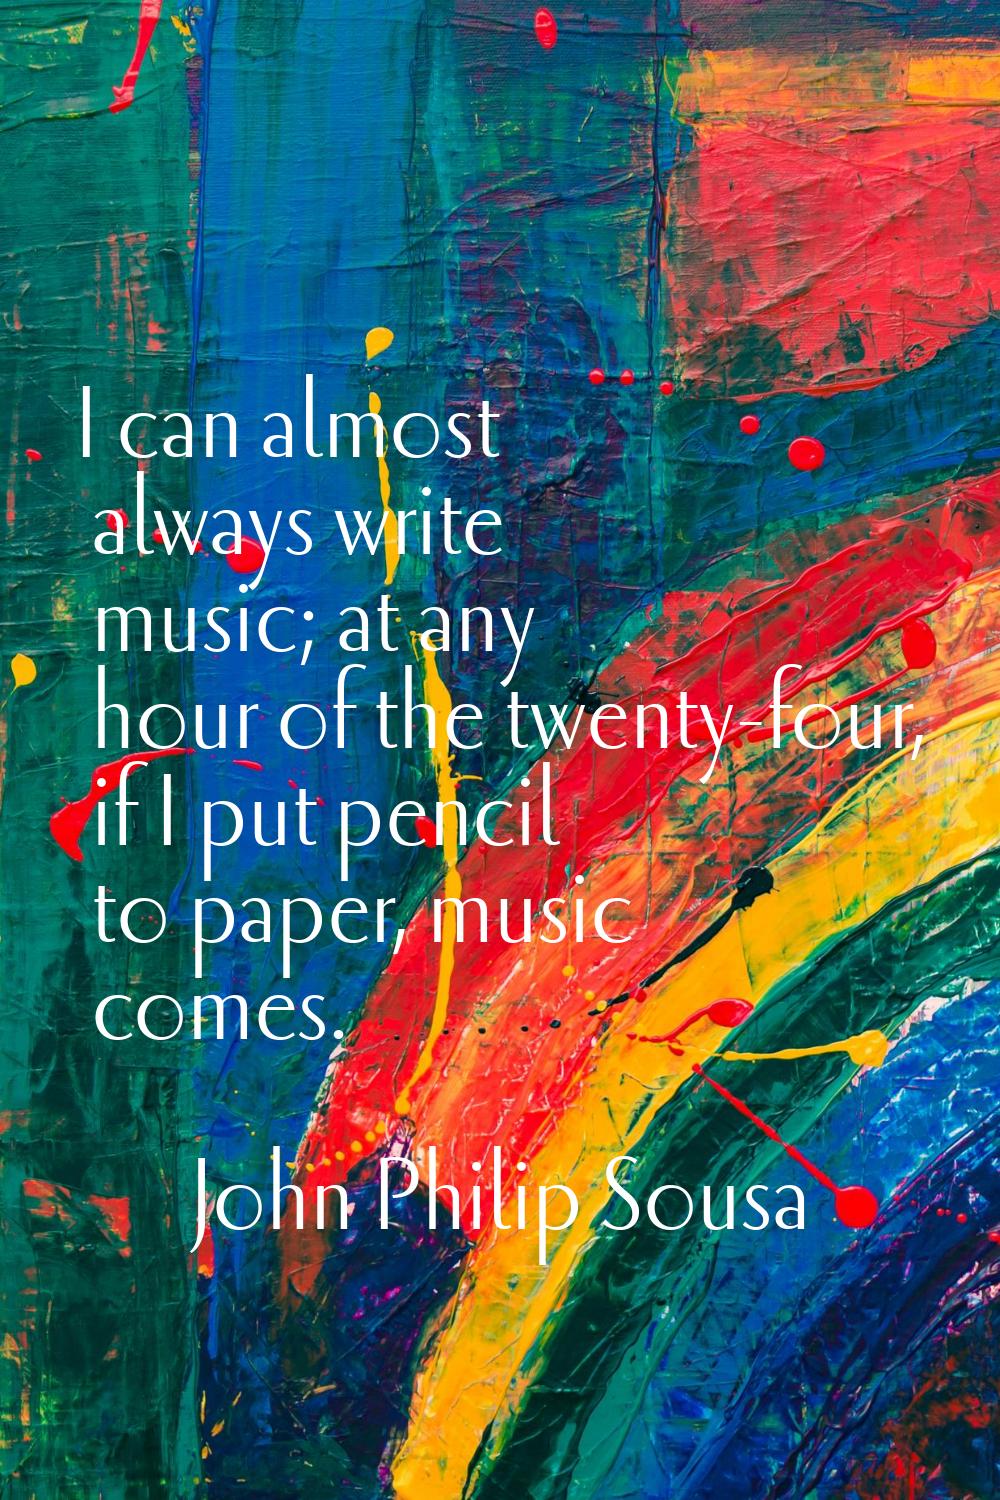 I can almost always write music; at any hour of the twenty-four, if I put pencil to paper, music co